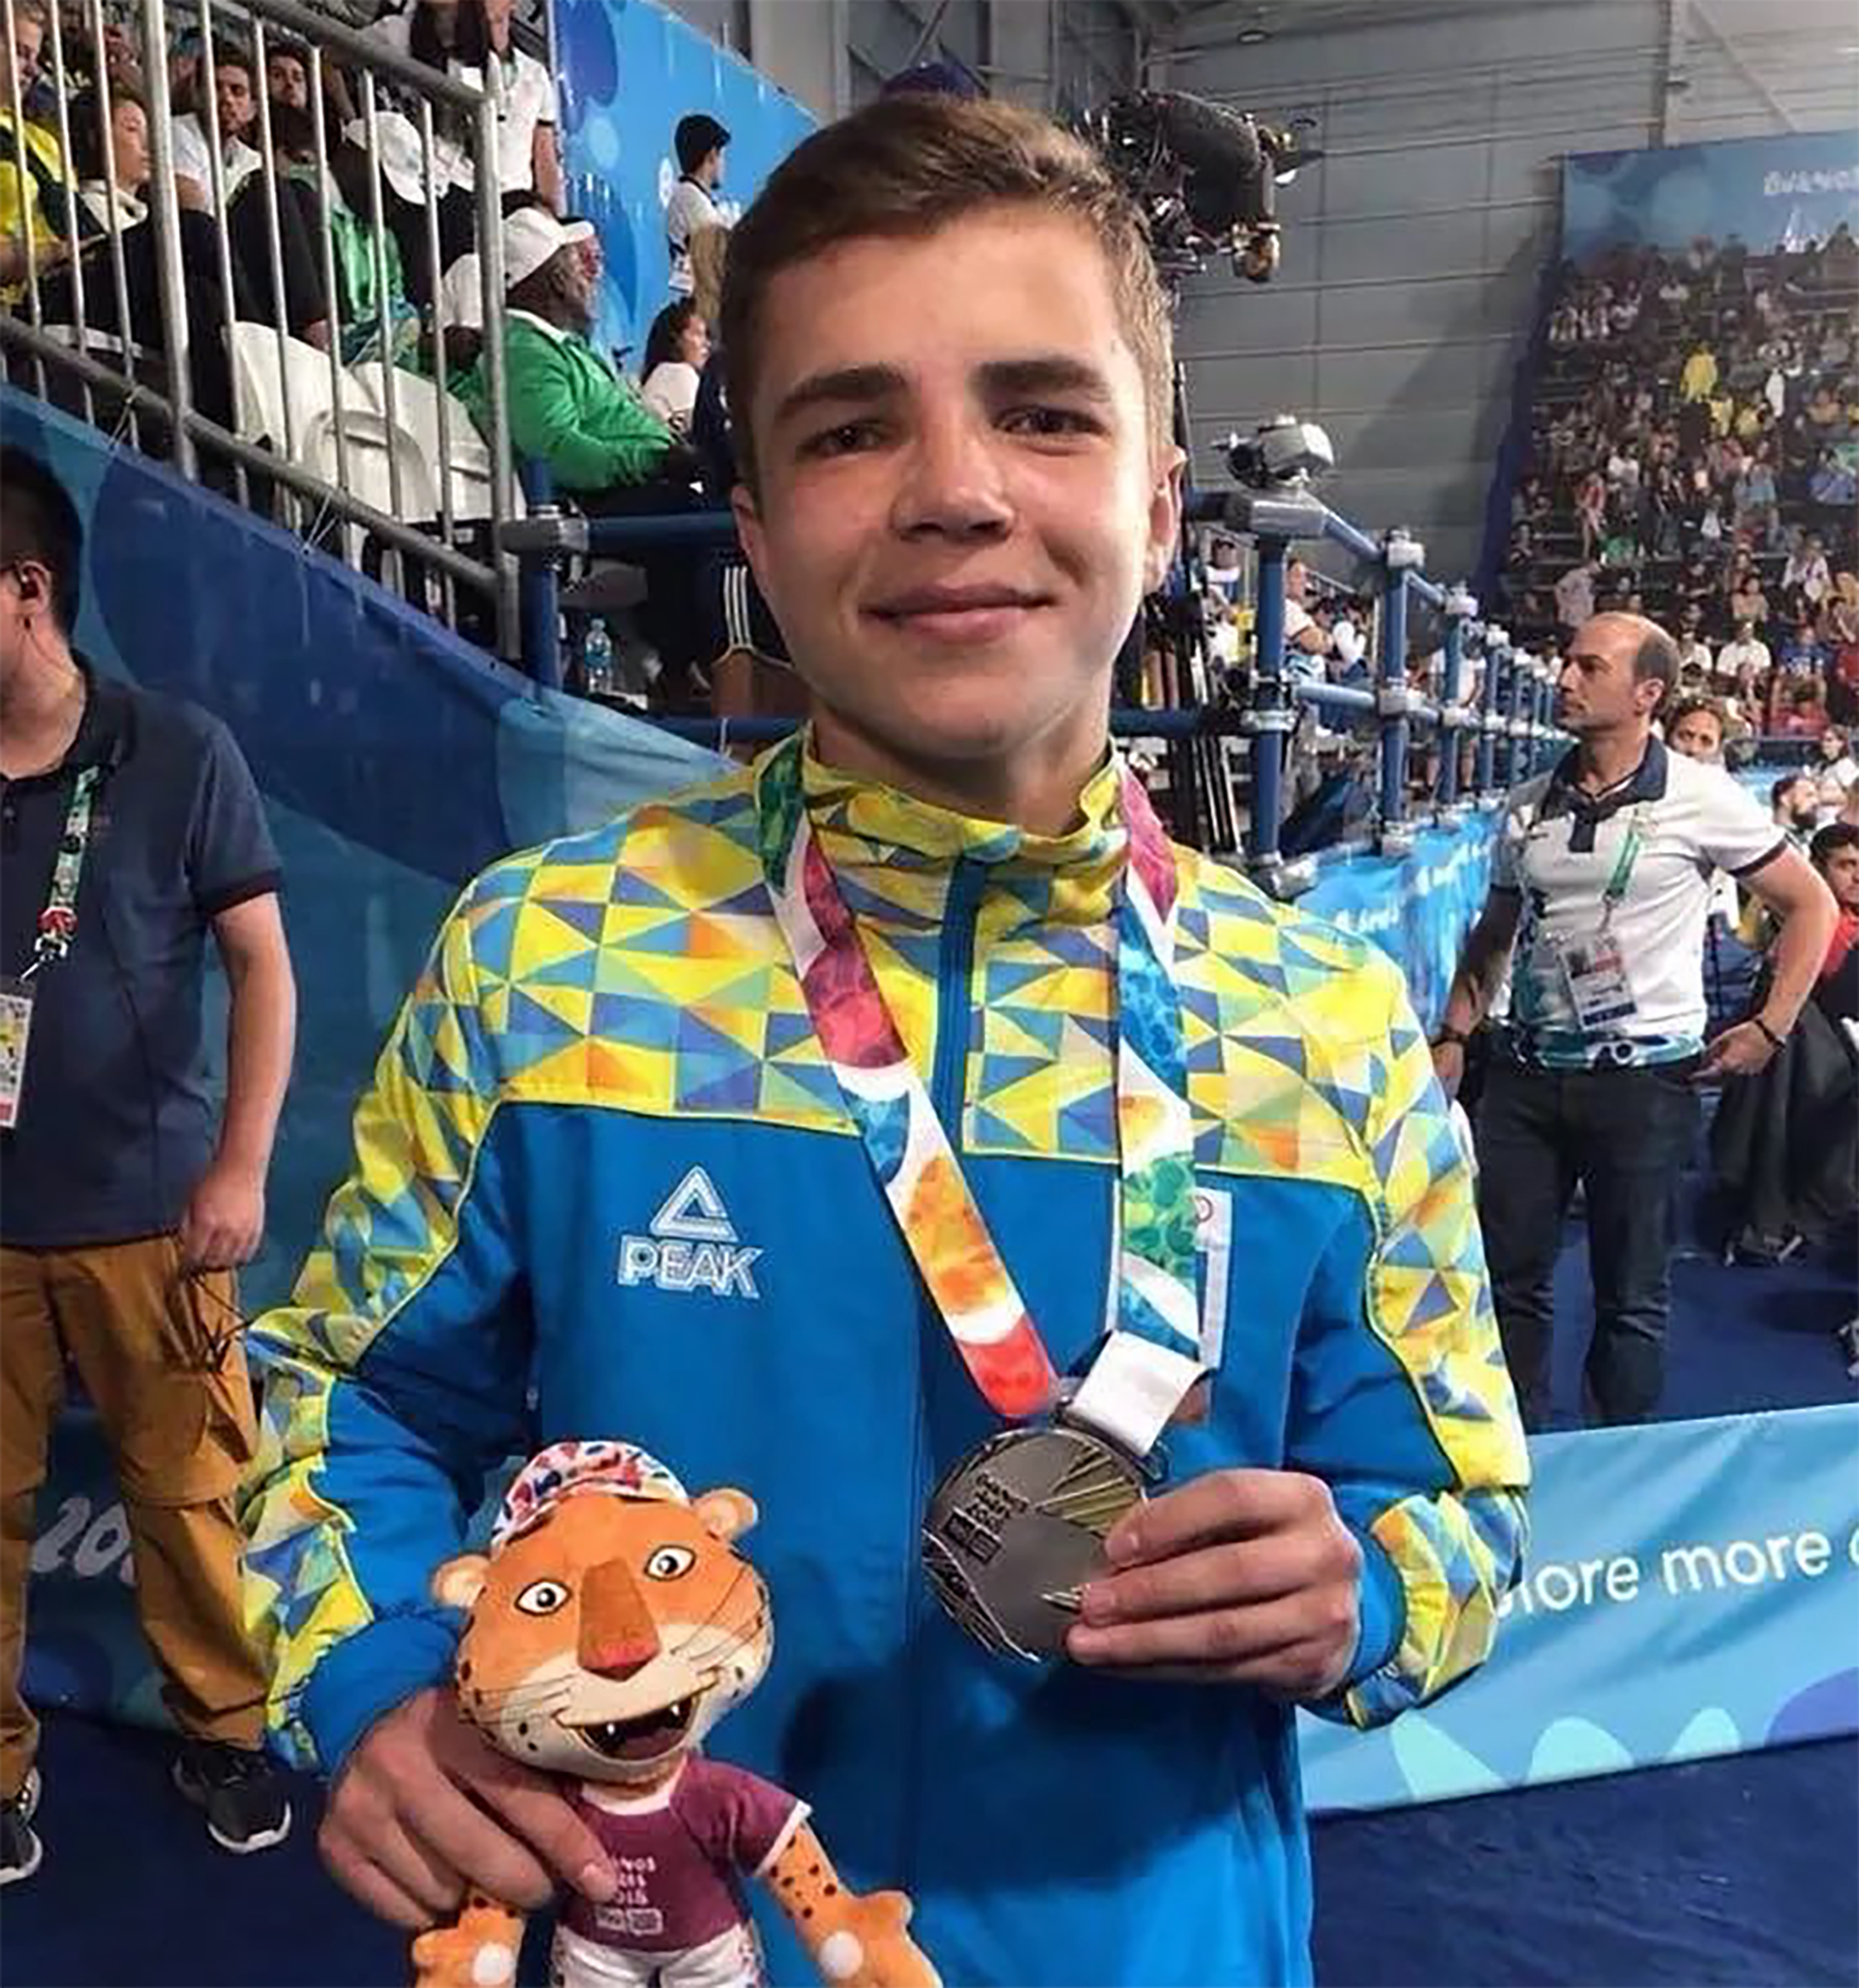 He won a silver medal in boxing at the Buenos Aires 2018 Youth Olympic Games.